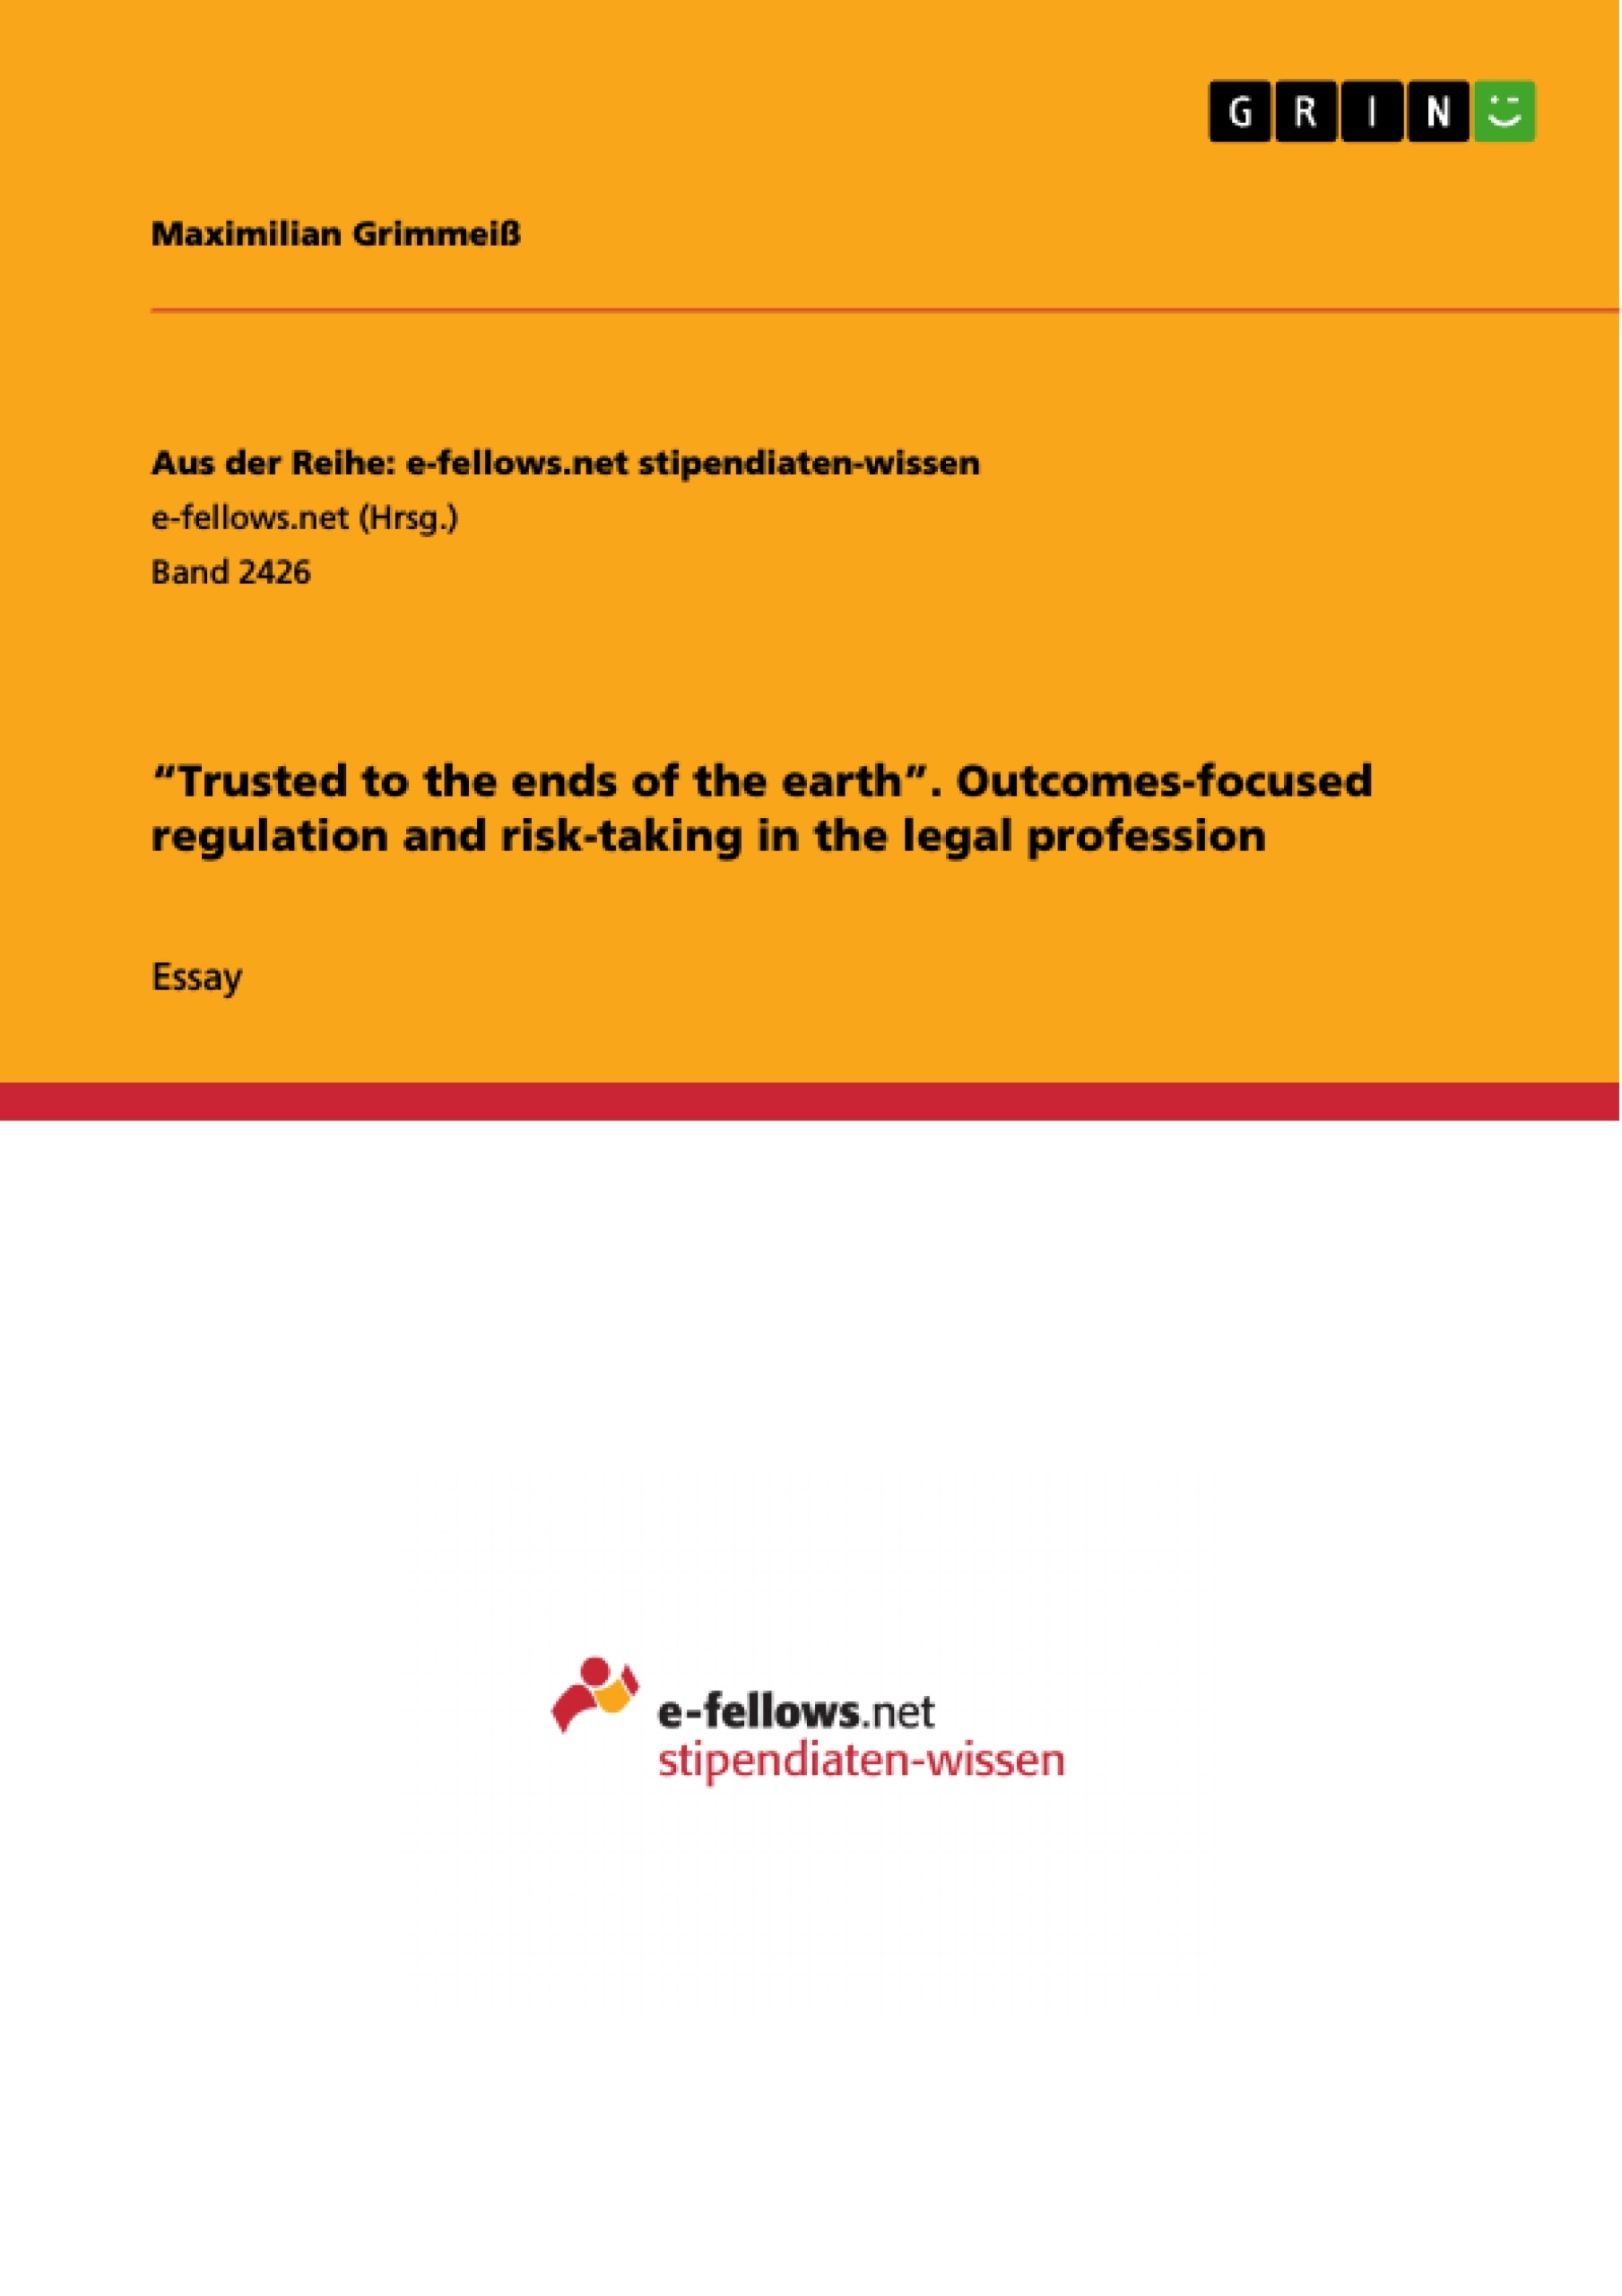 Title: “Trusted to the ends of the earth”. Outcomes-focused regulation and risk-taking in the legal profession